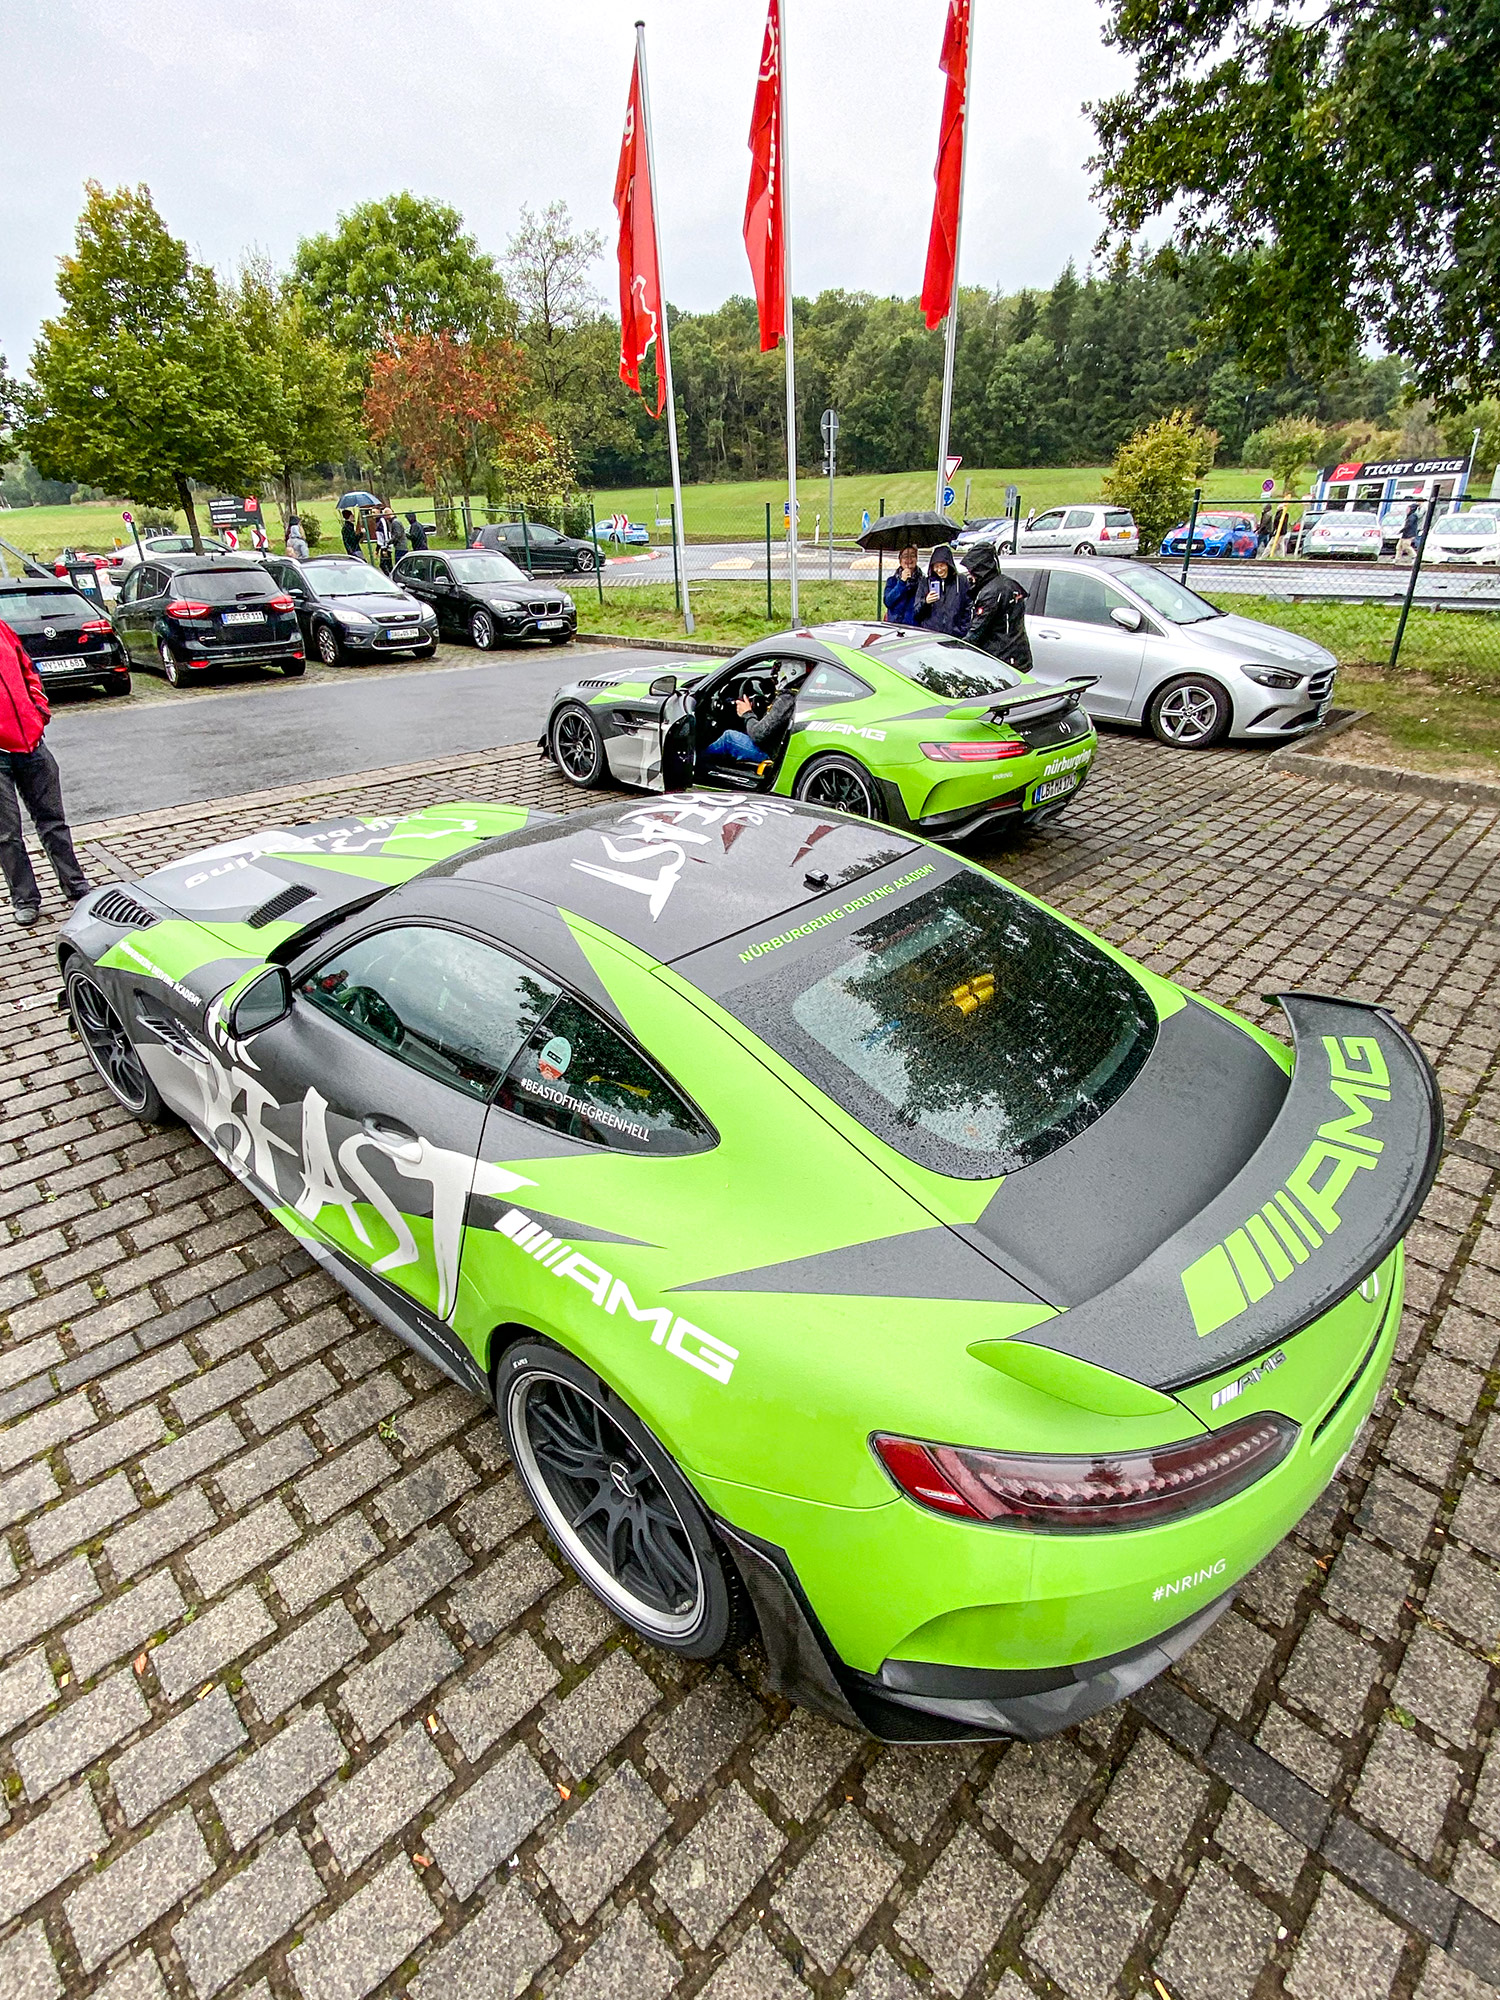 All Was Not Lost at the Nurburgring